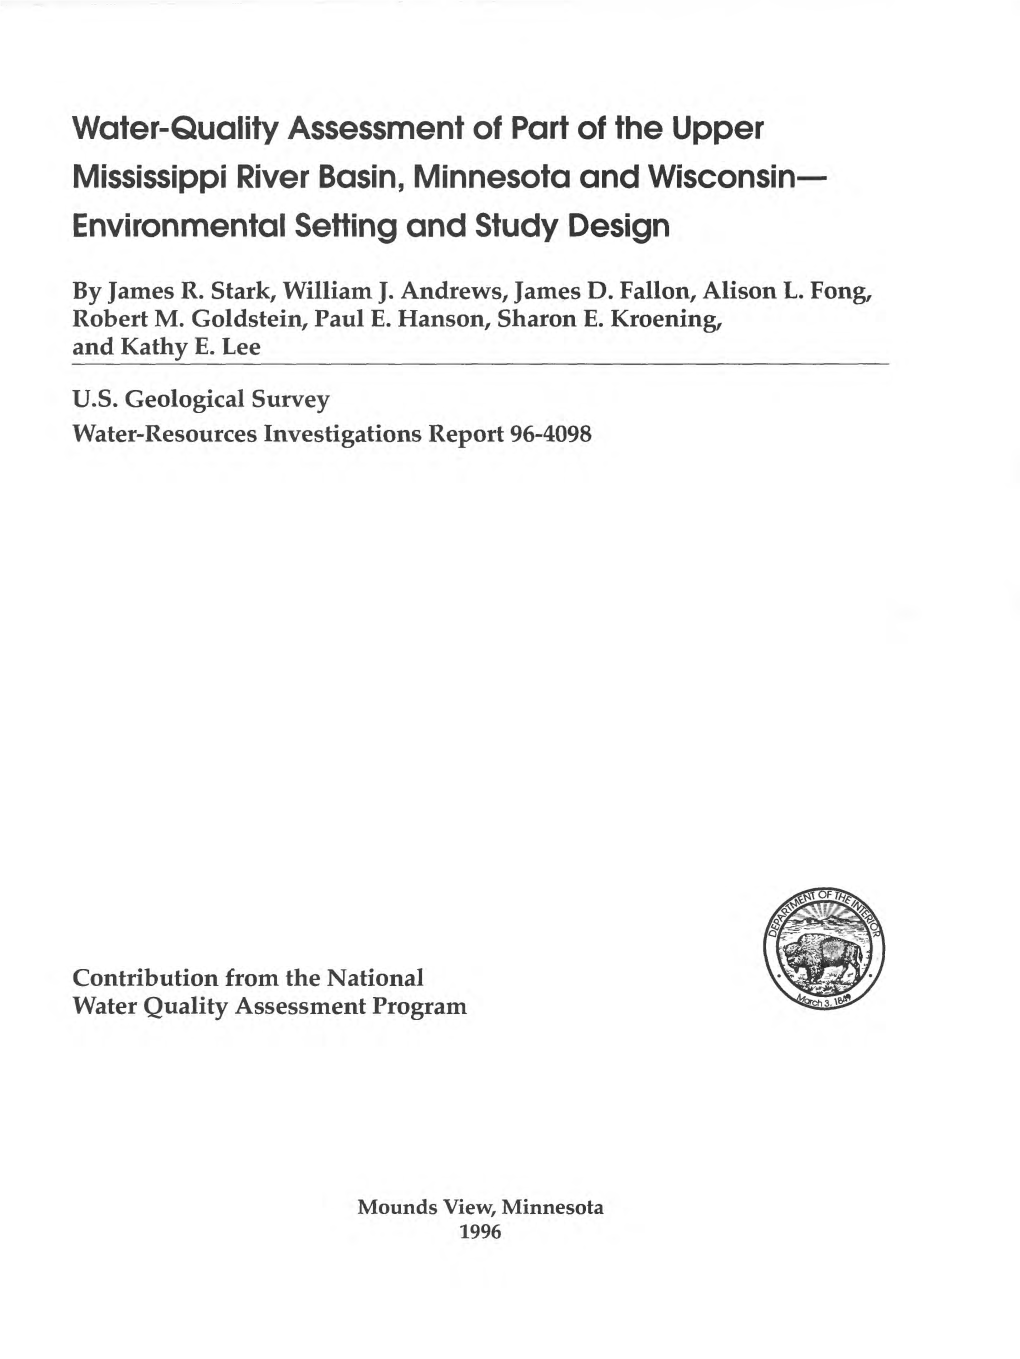 Water-Quality Assessment of Part of the Upper Mississippi River Basin, Minnesota and Wisconsin- Environmental Setting and Study Design